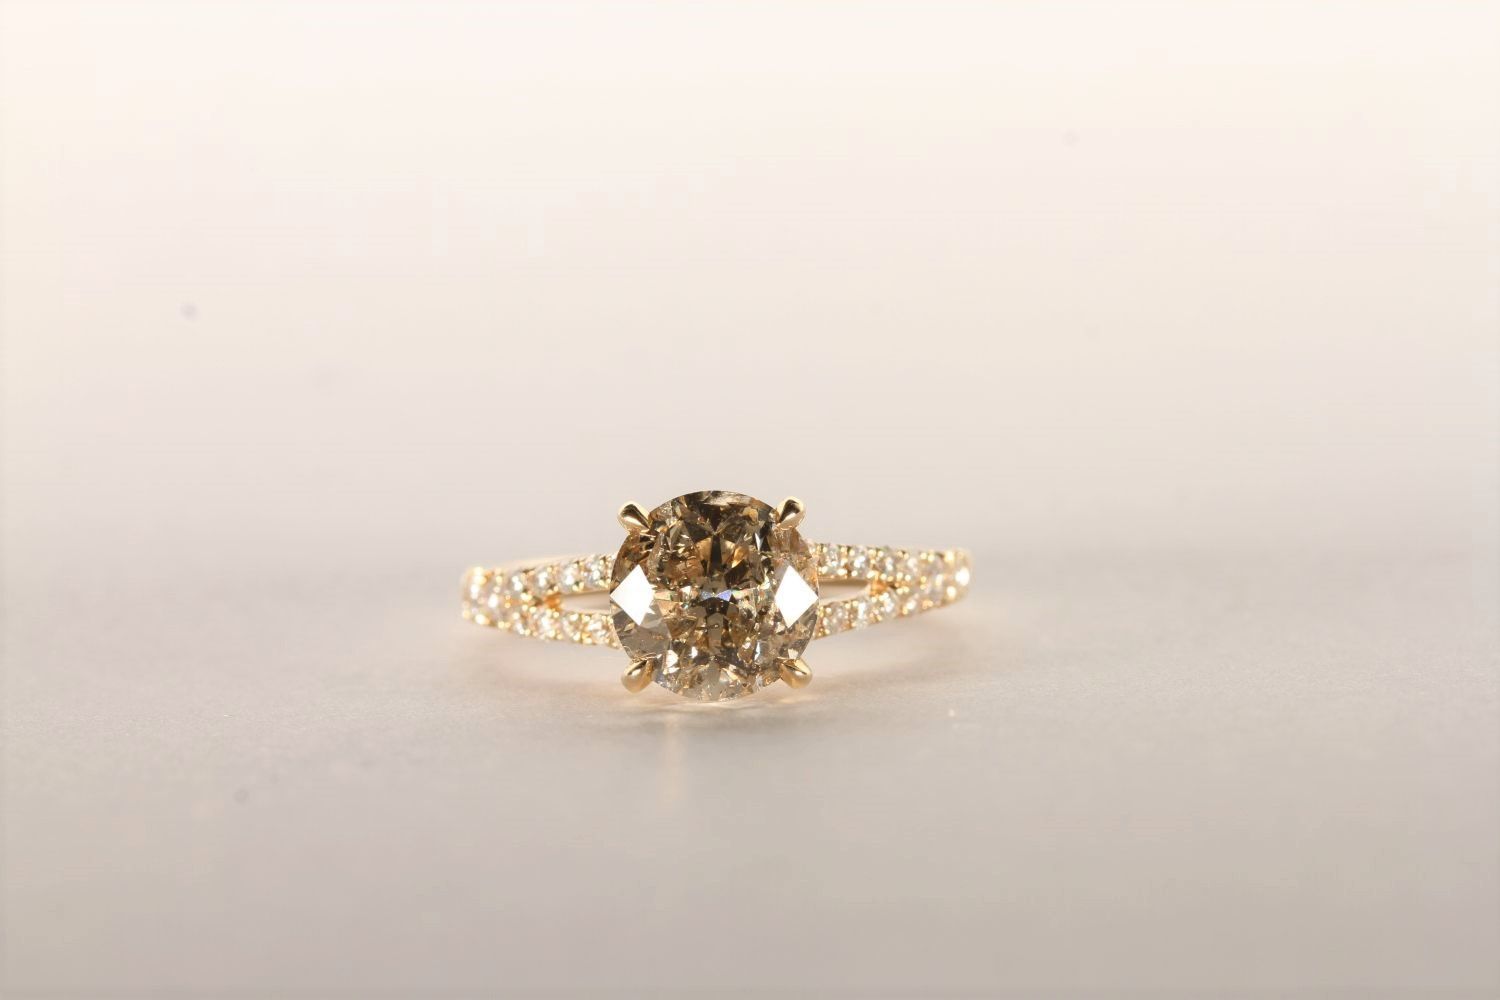 Champagne Diamond Ring, set with a round brilliant cut champagne diamond totalling 2.12ct, 4 claw